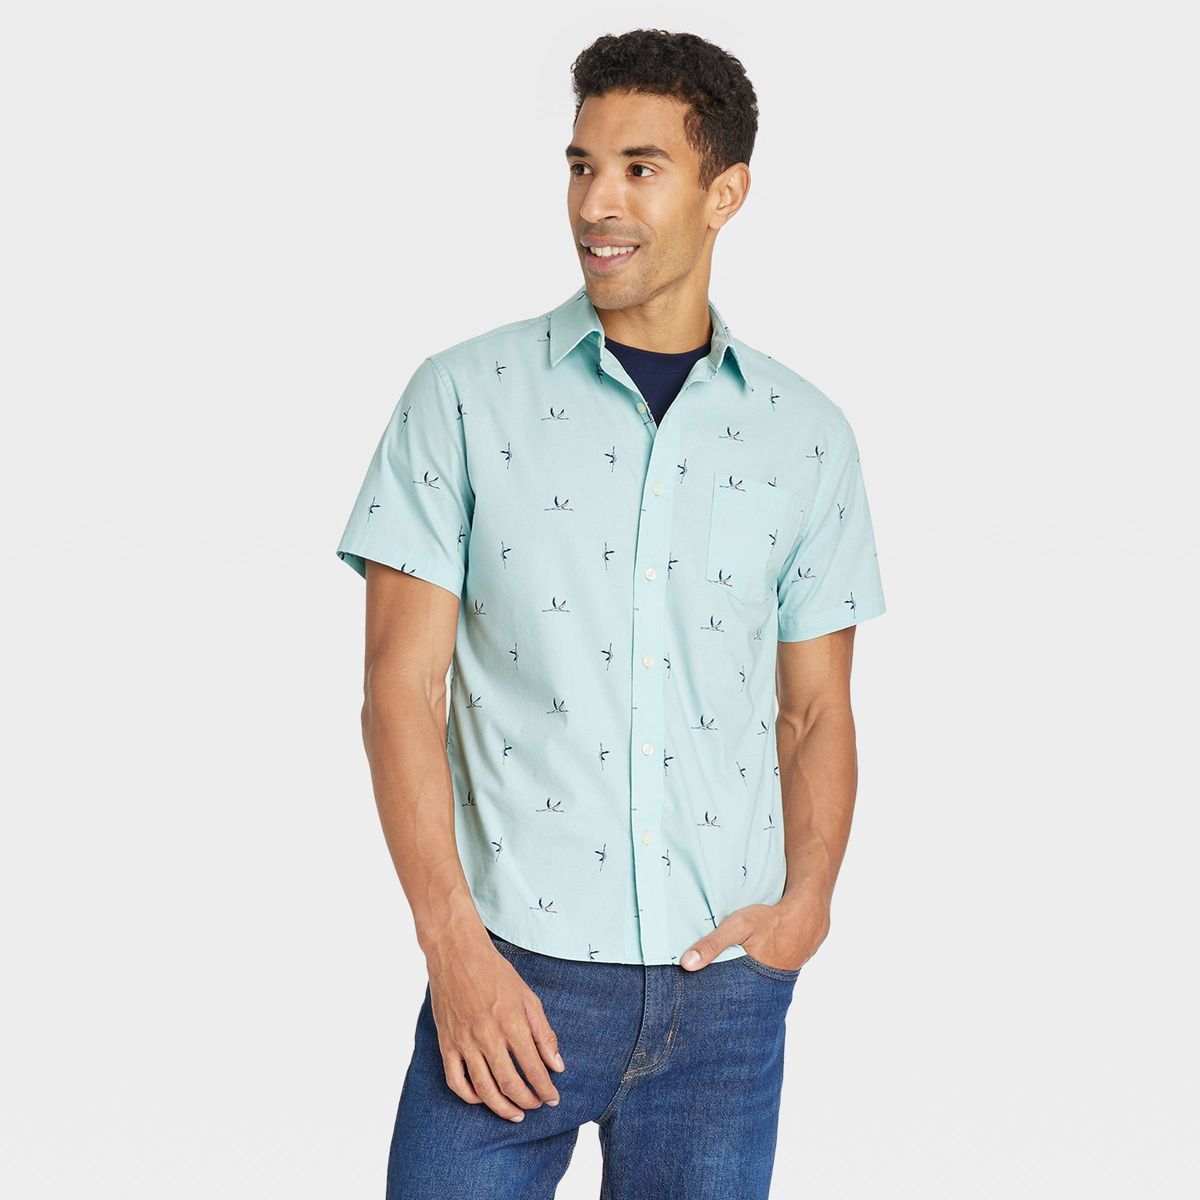 Men's Short Sleeve Slim Fit Button-Down Shirt - Goodfellow & Co™ Turquoise Blue S | Target